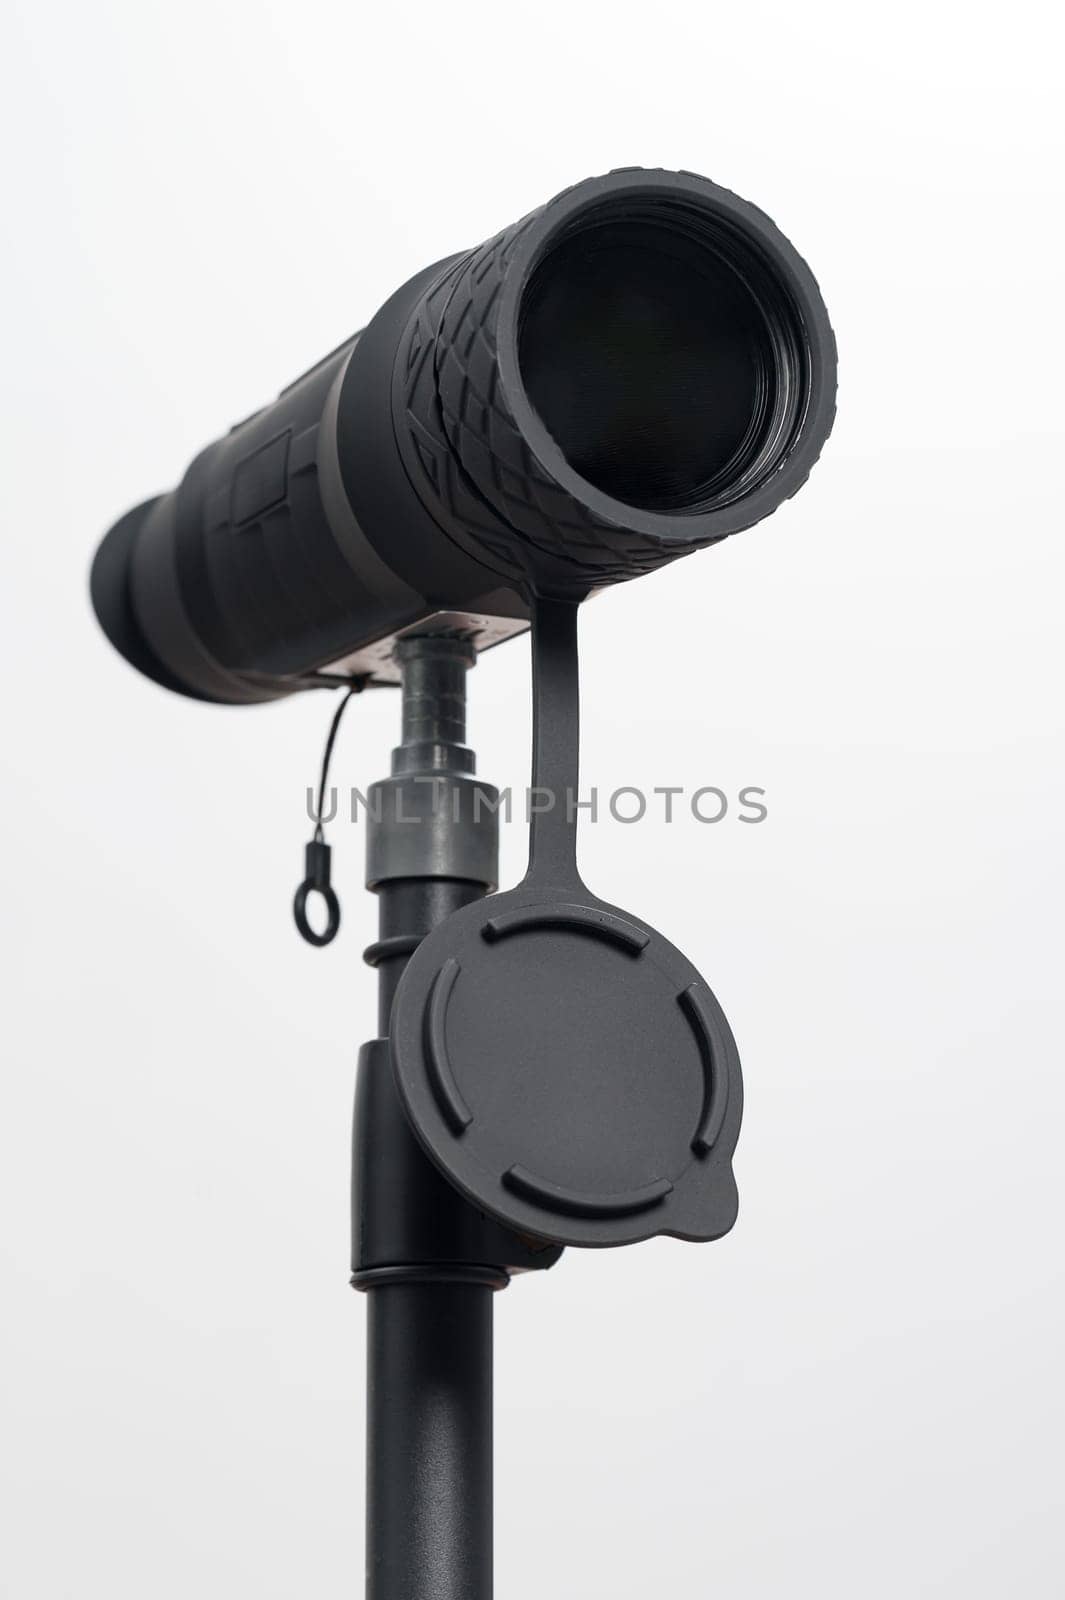 Monocular on a tripod isolated on a white background, monocular for military action.